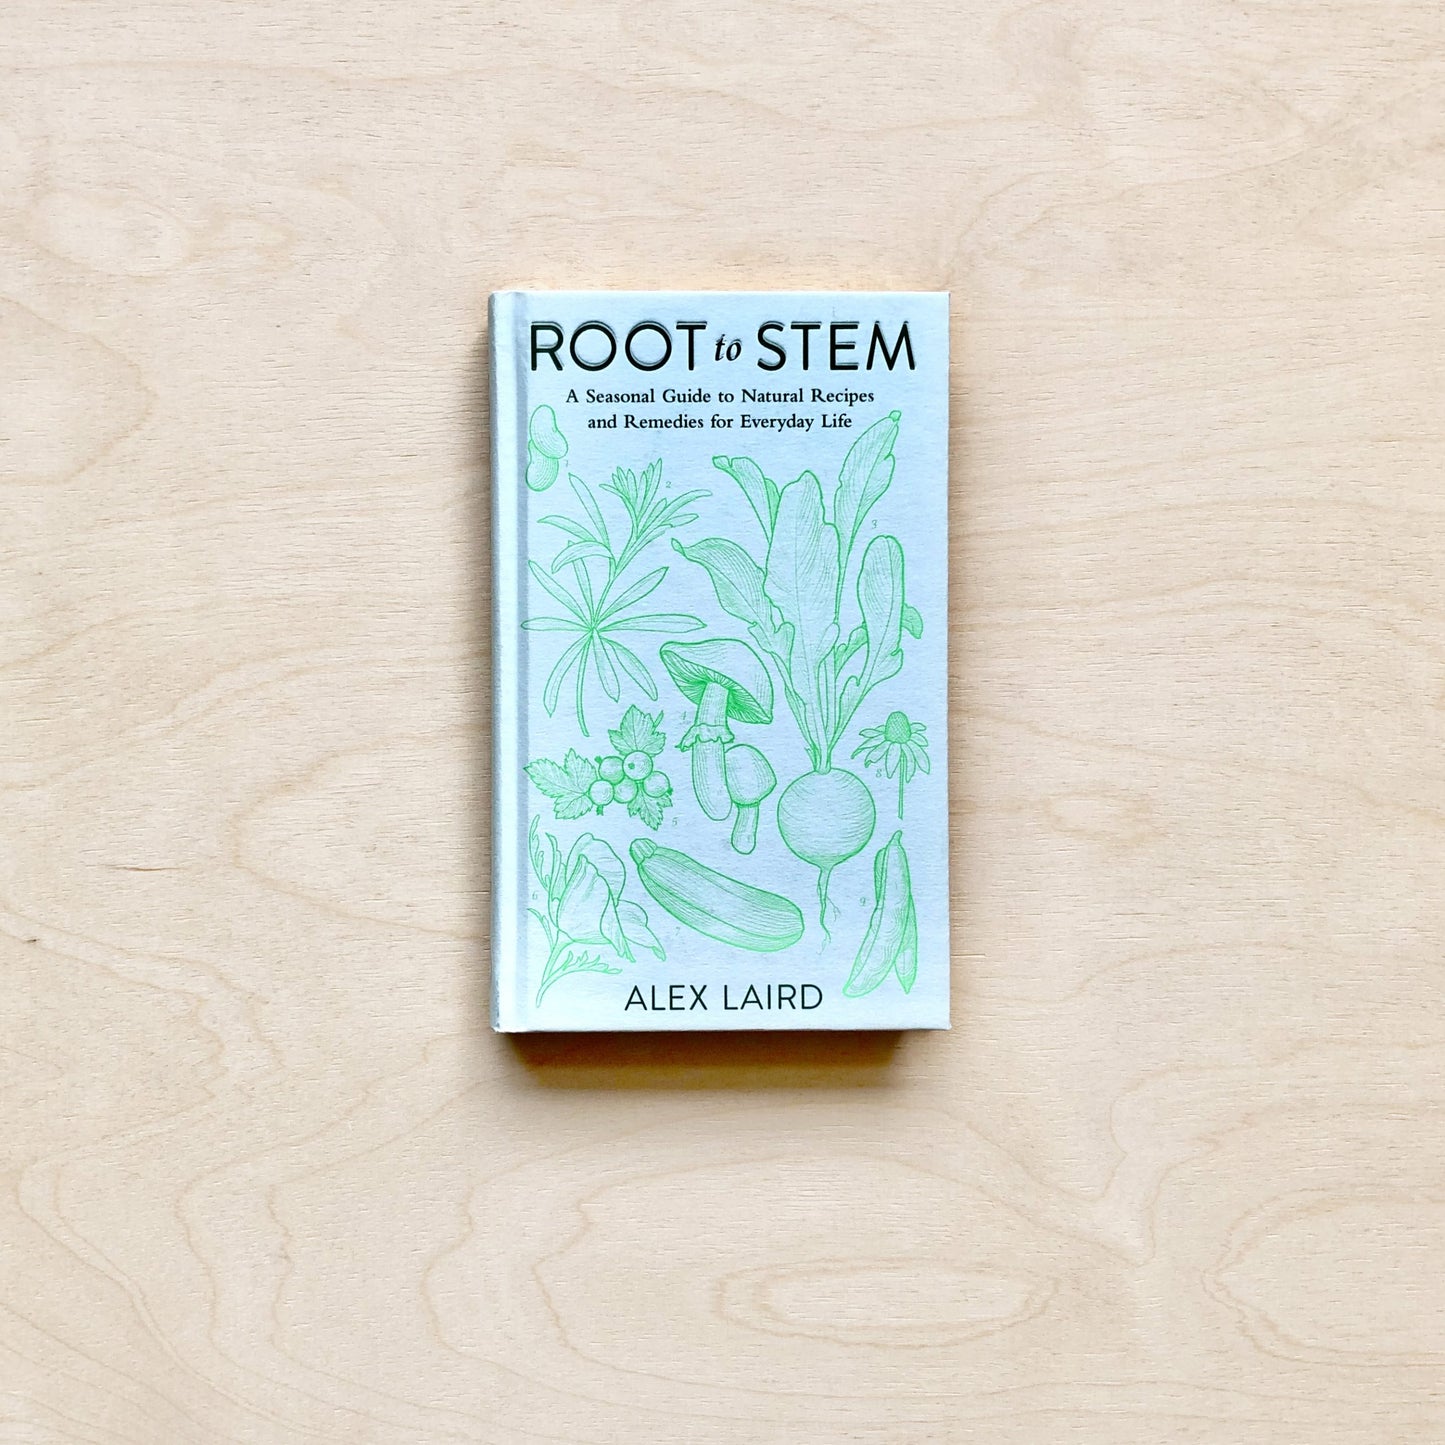 Root to Stem - A seasonal guide to natural recipes and remedies for everyday life